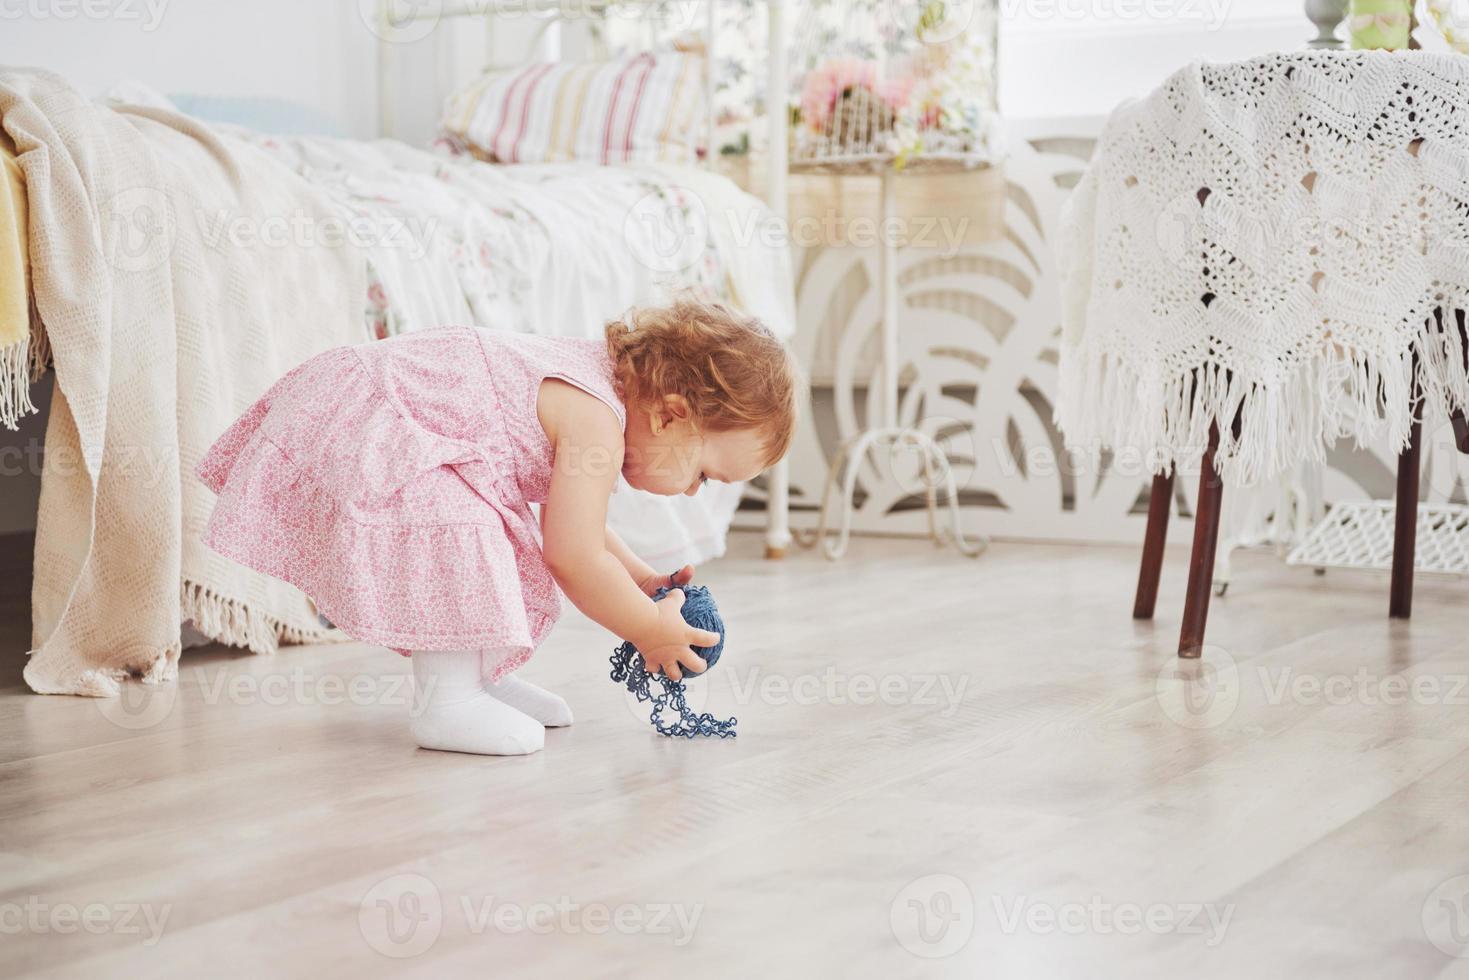 Childhood concept. Baby girl in cute dress play with colored thread. White vintage childroom photo